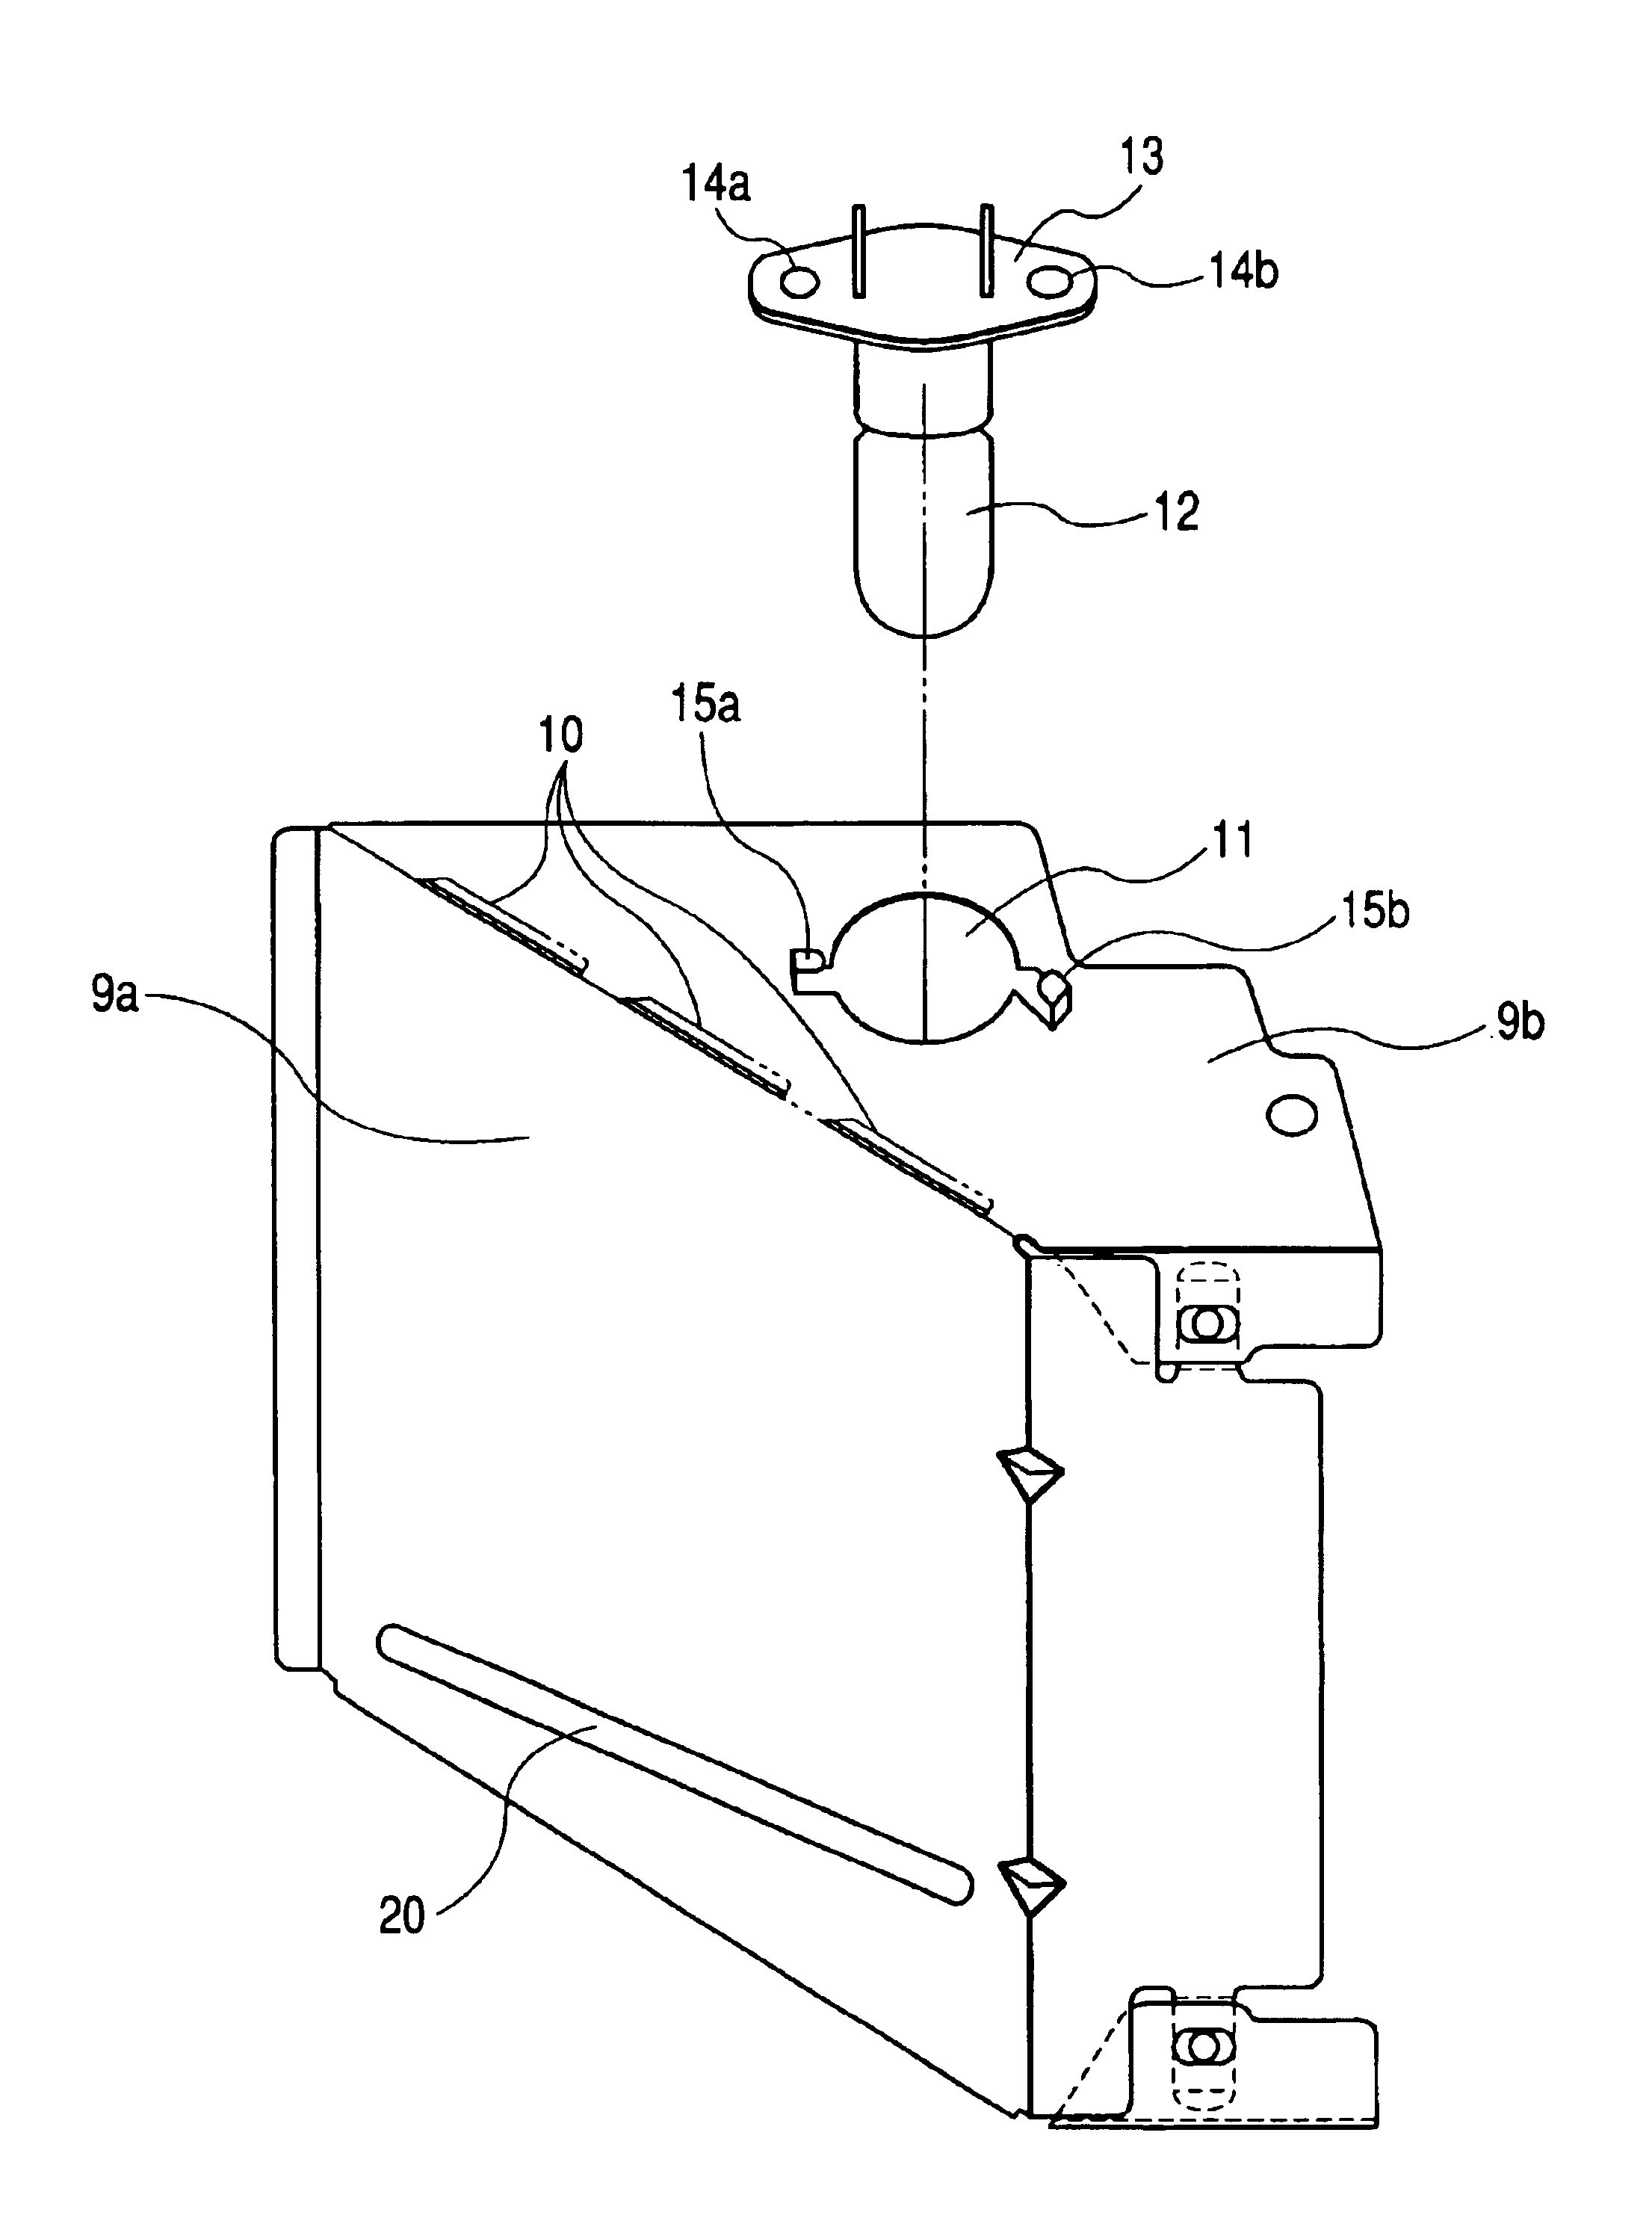 High-frequency heating apparatus with illumination device